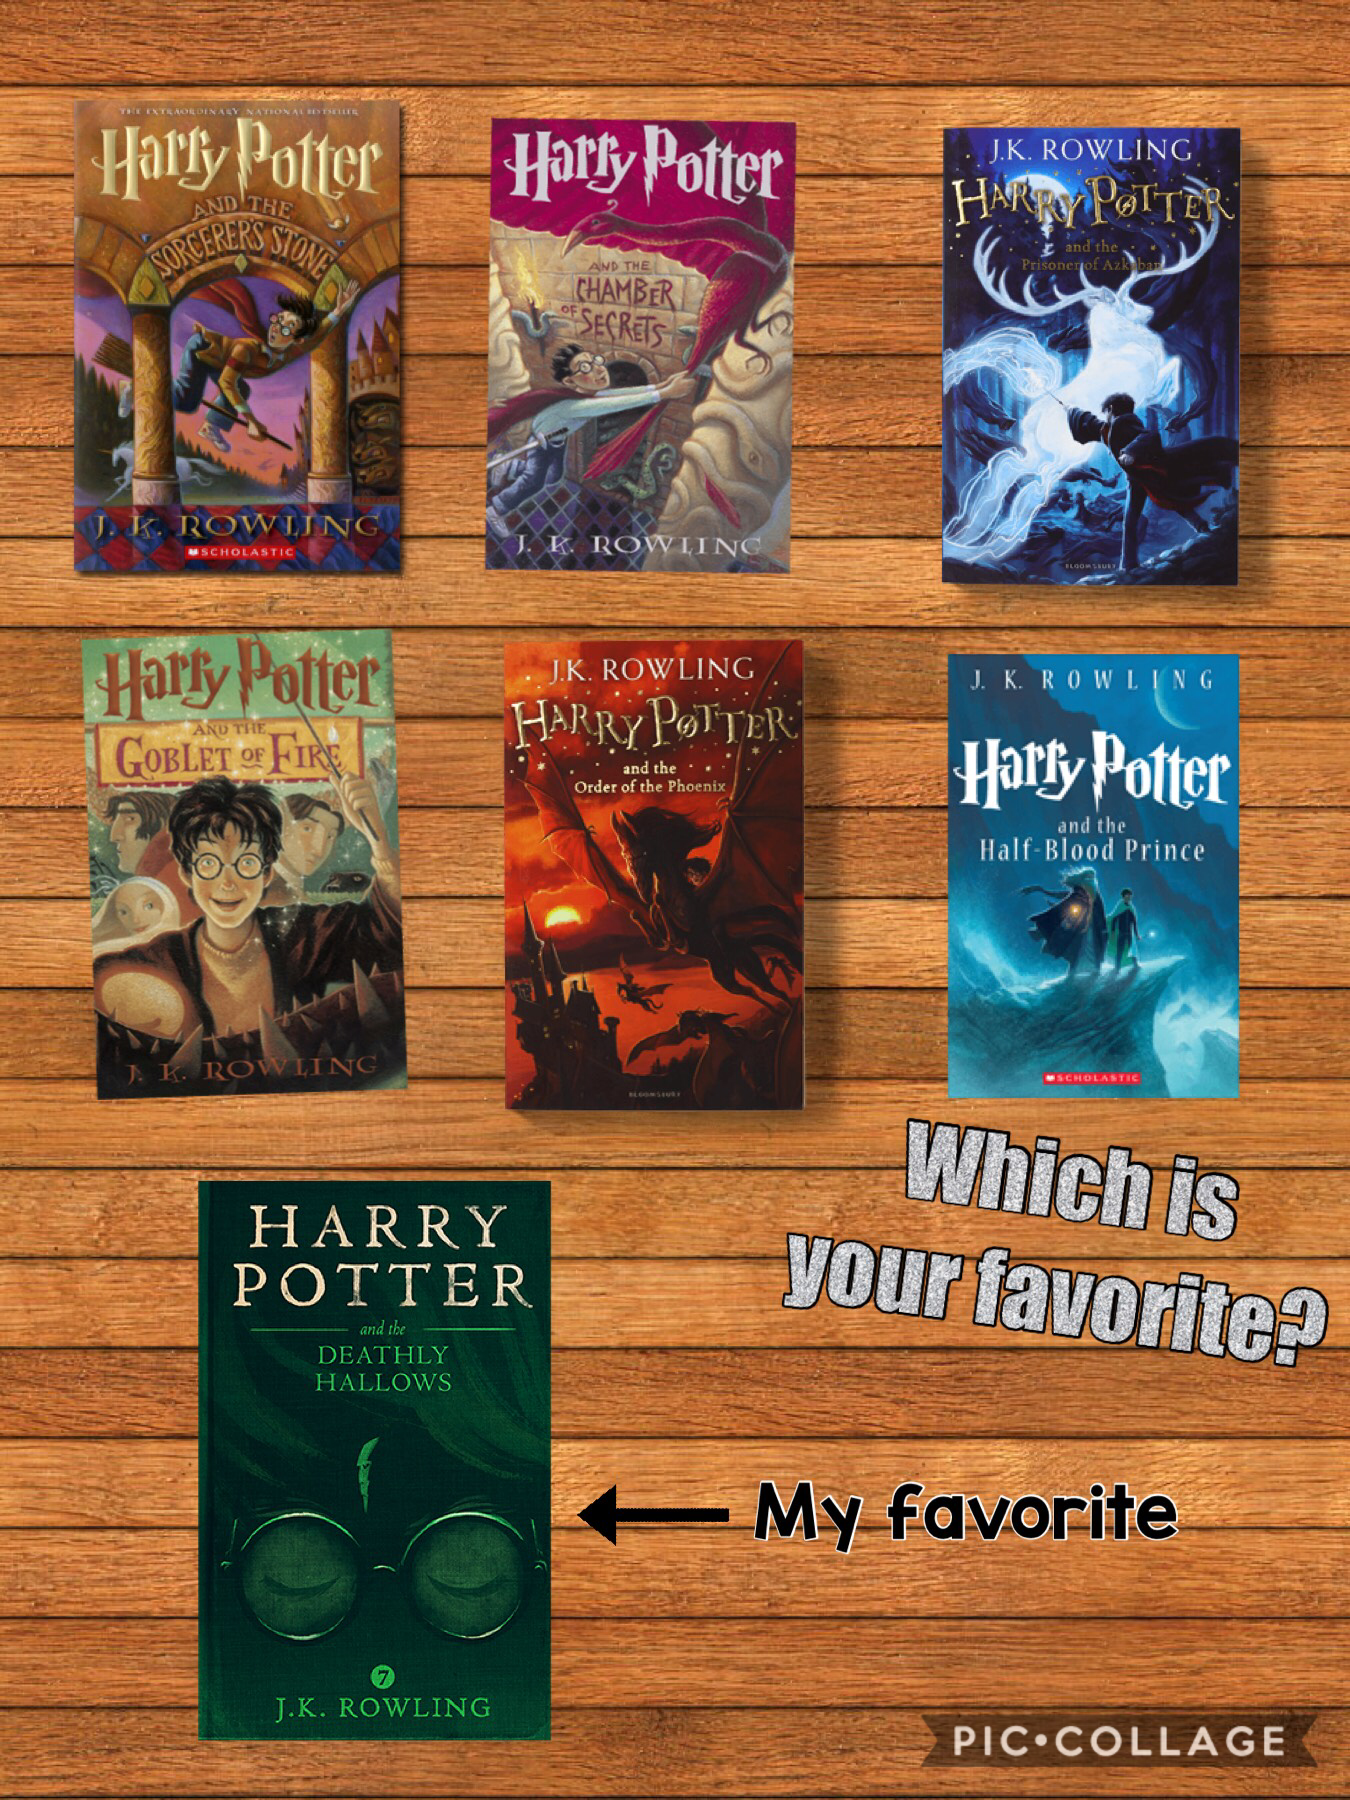 Let me know your favorite book in the series! (If you read it of course)